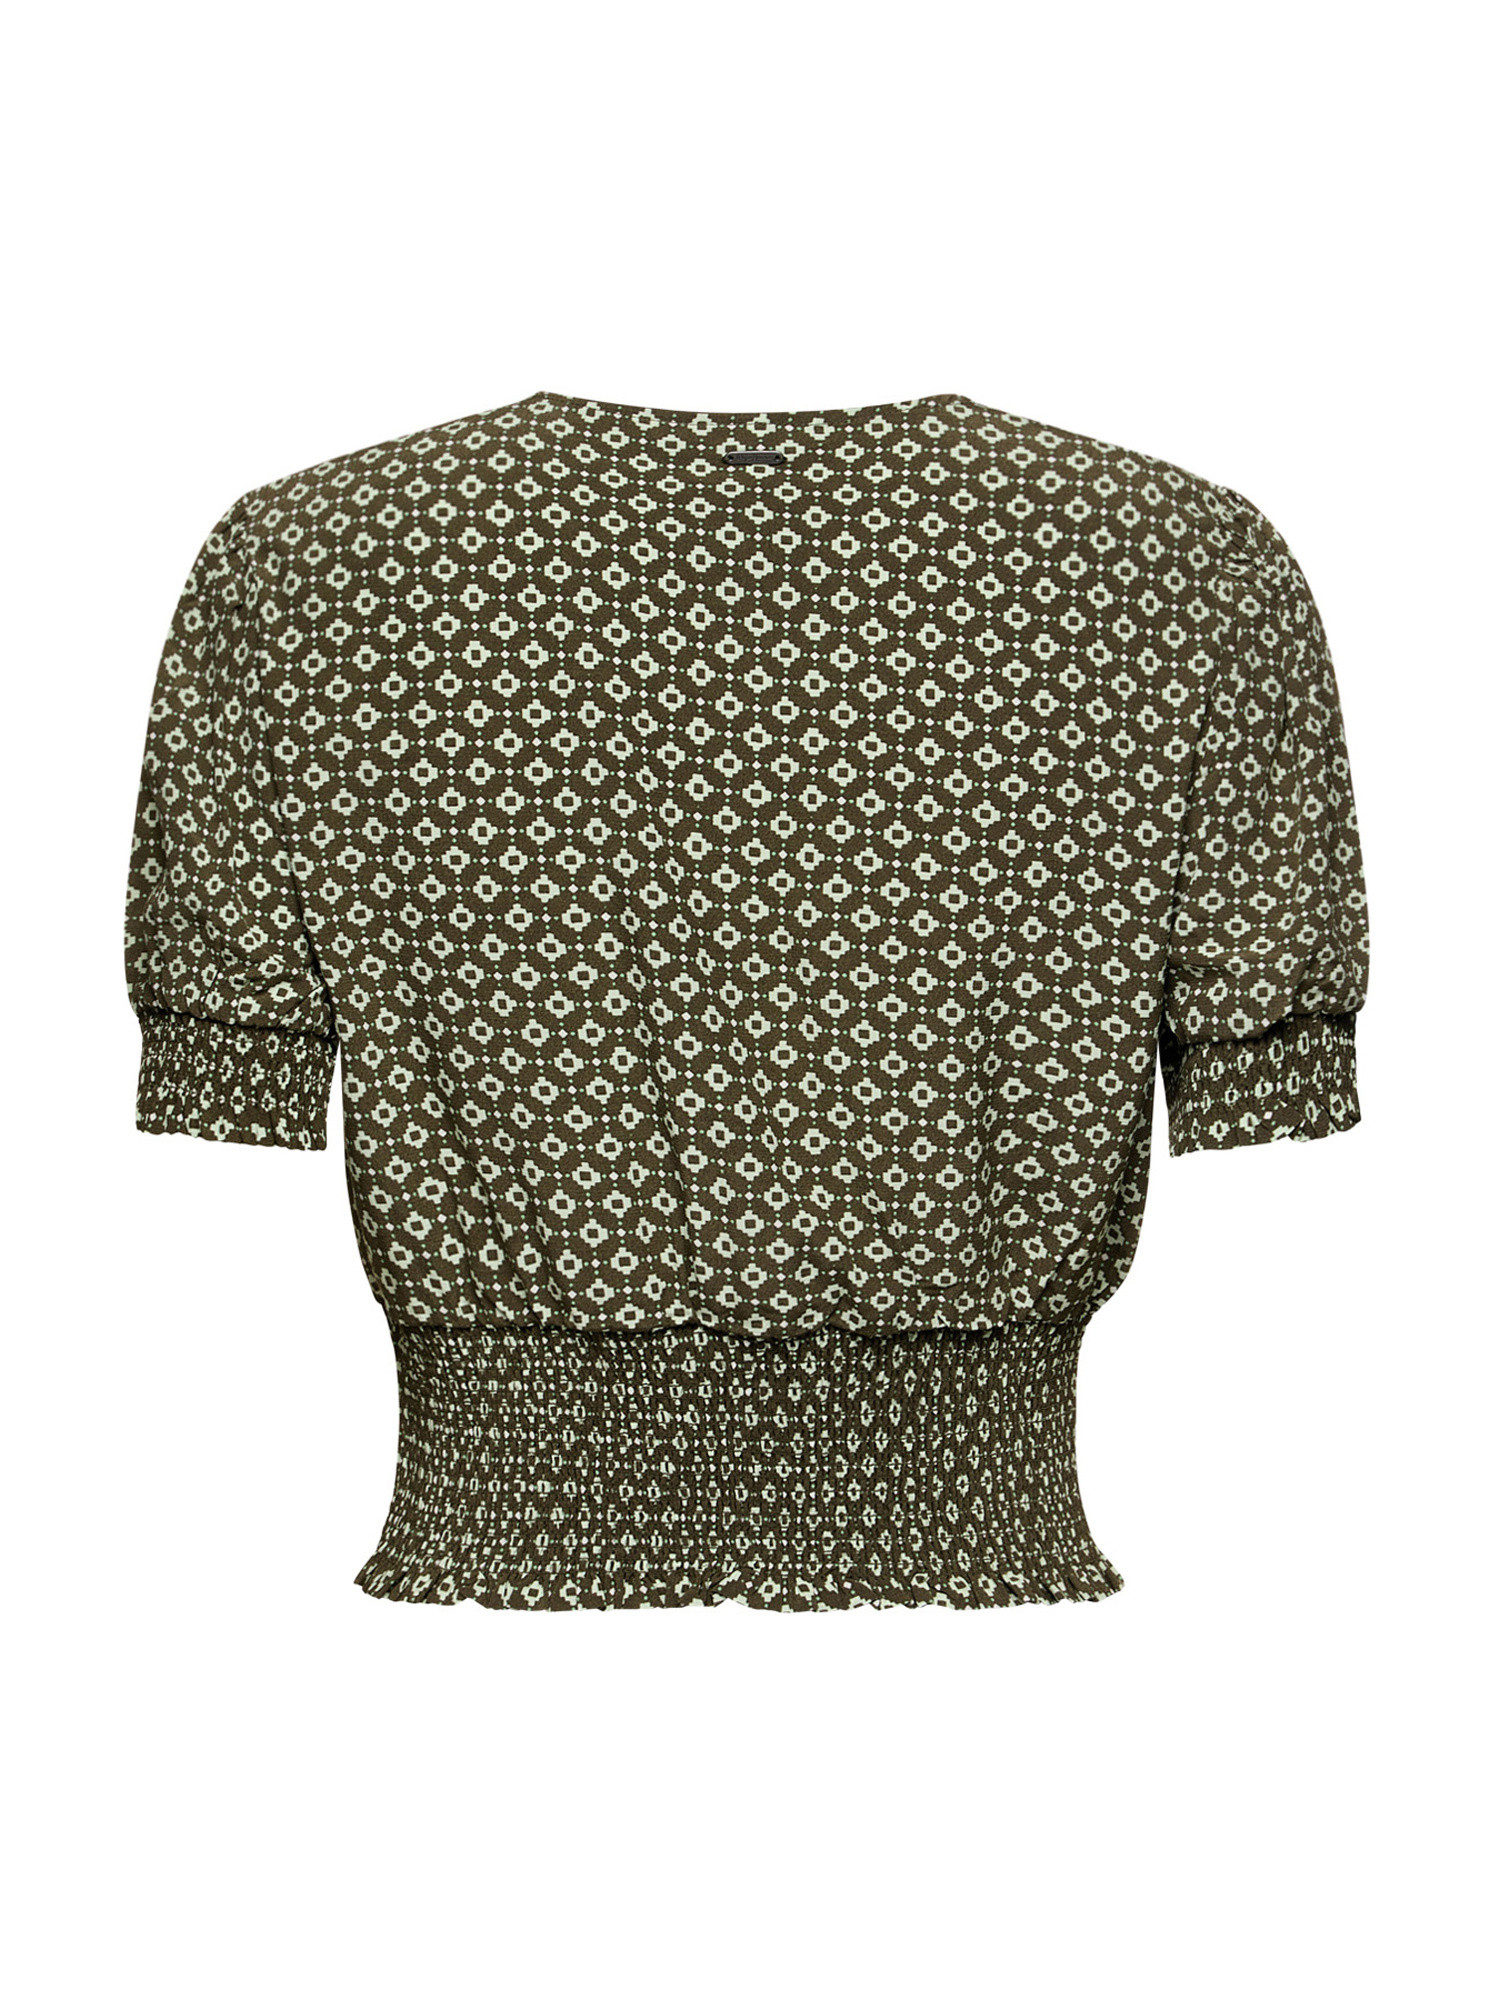 Pepe Jeans - Blouse with geometric print, Olive Green, large image number 1